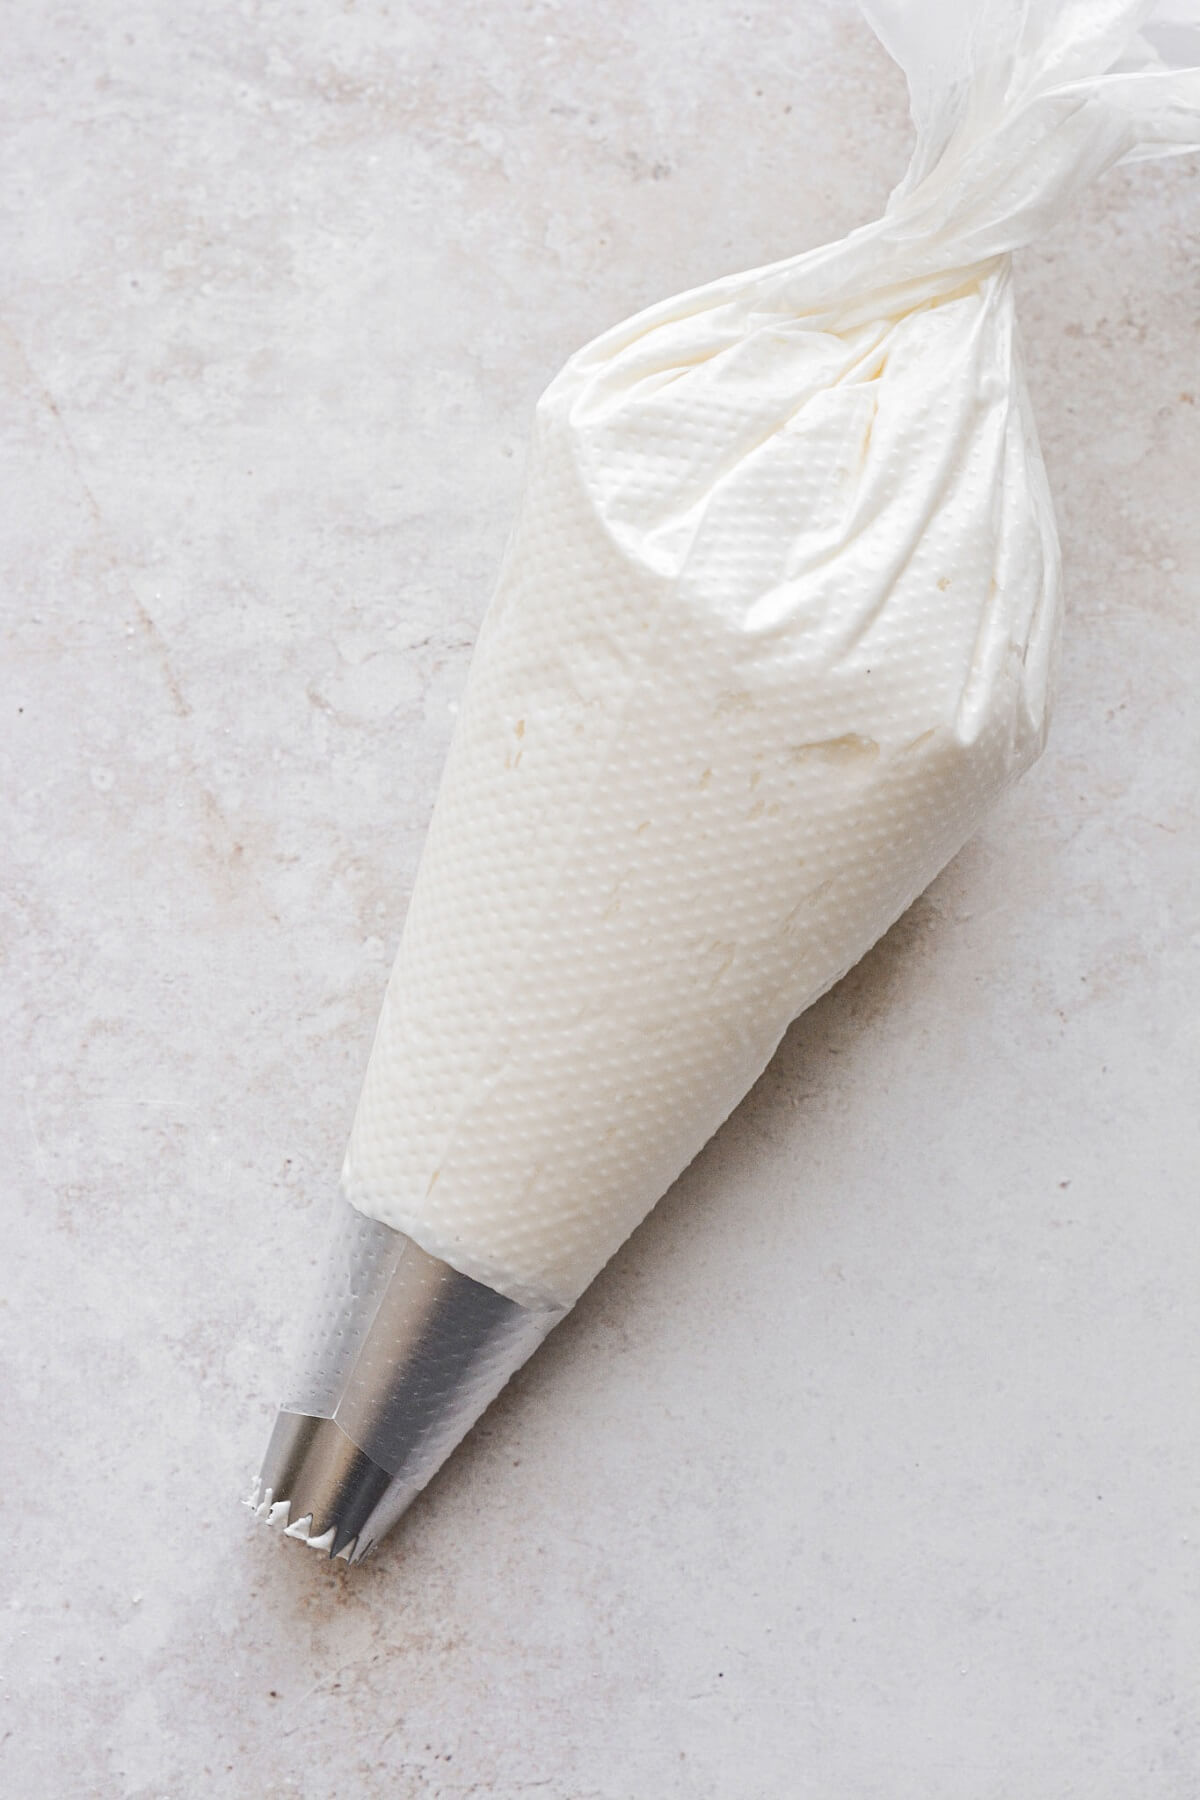 Piping bag filled with lemon cream cheese buttercream.